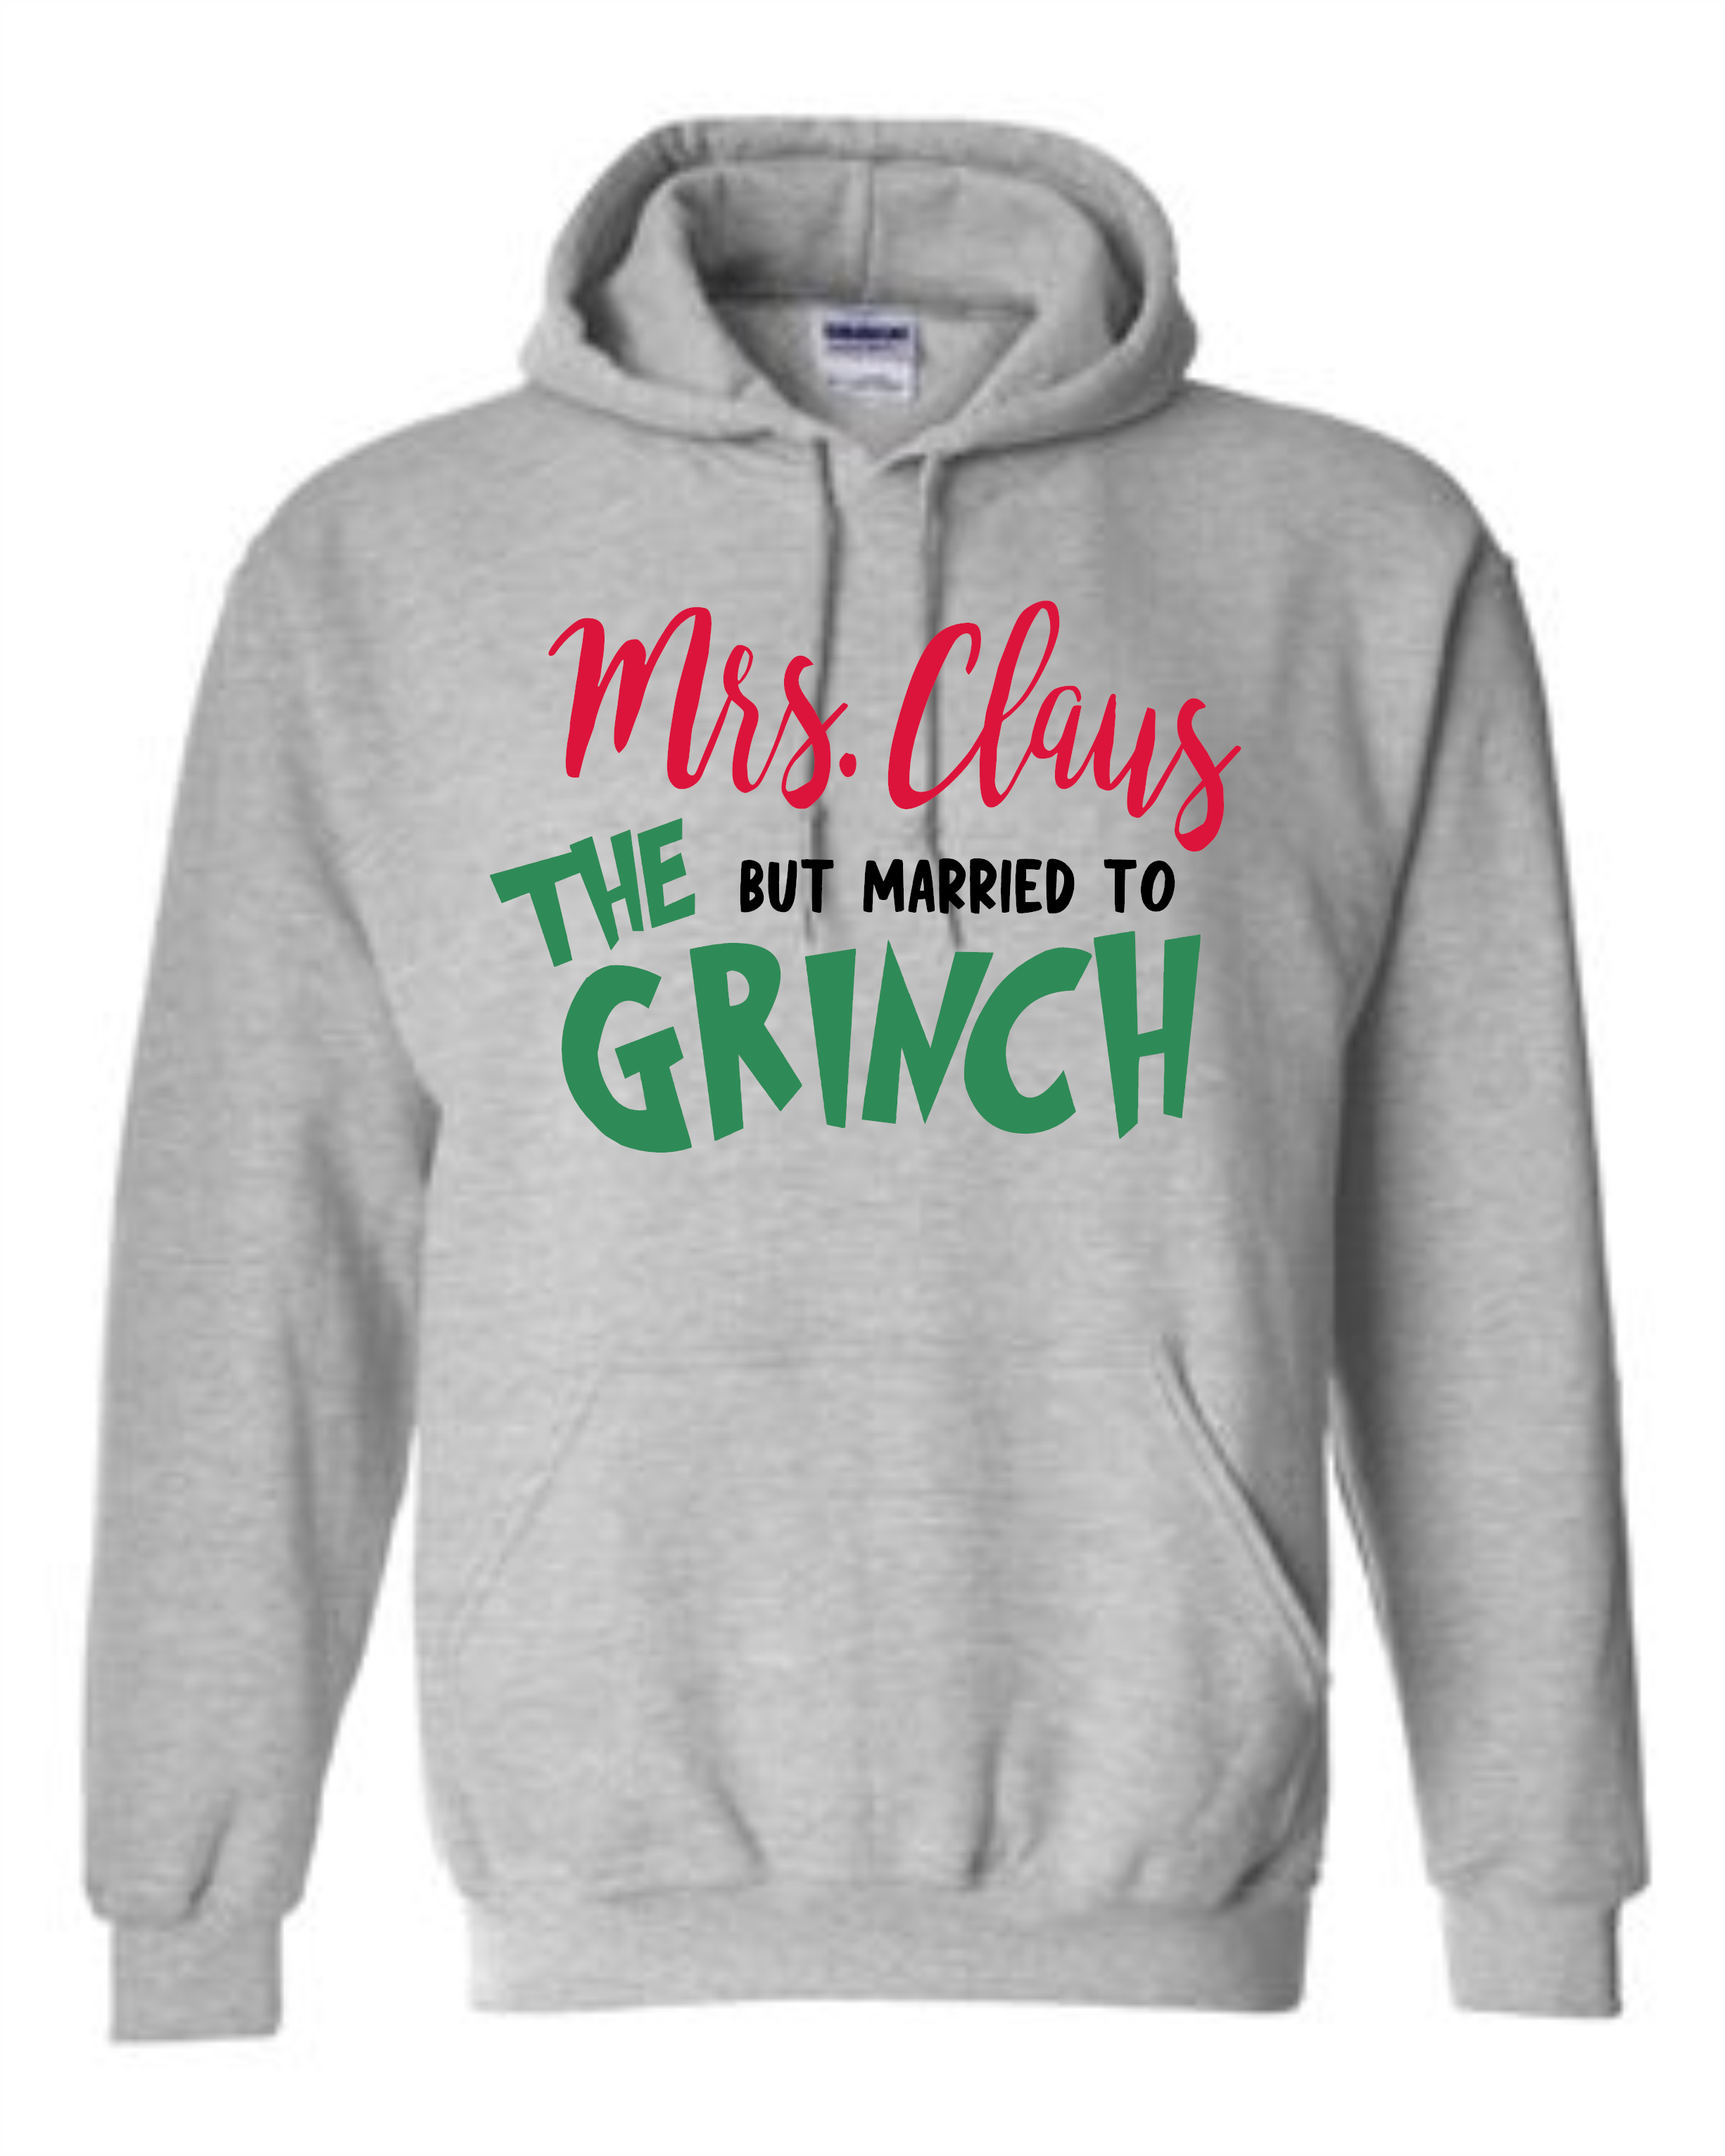 Mrs Claus married to The Grinch